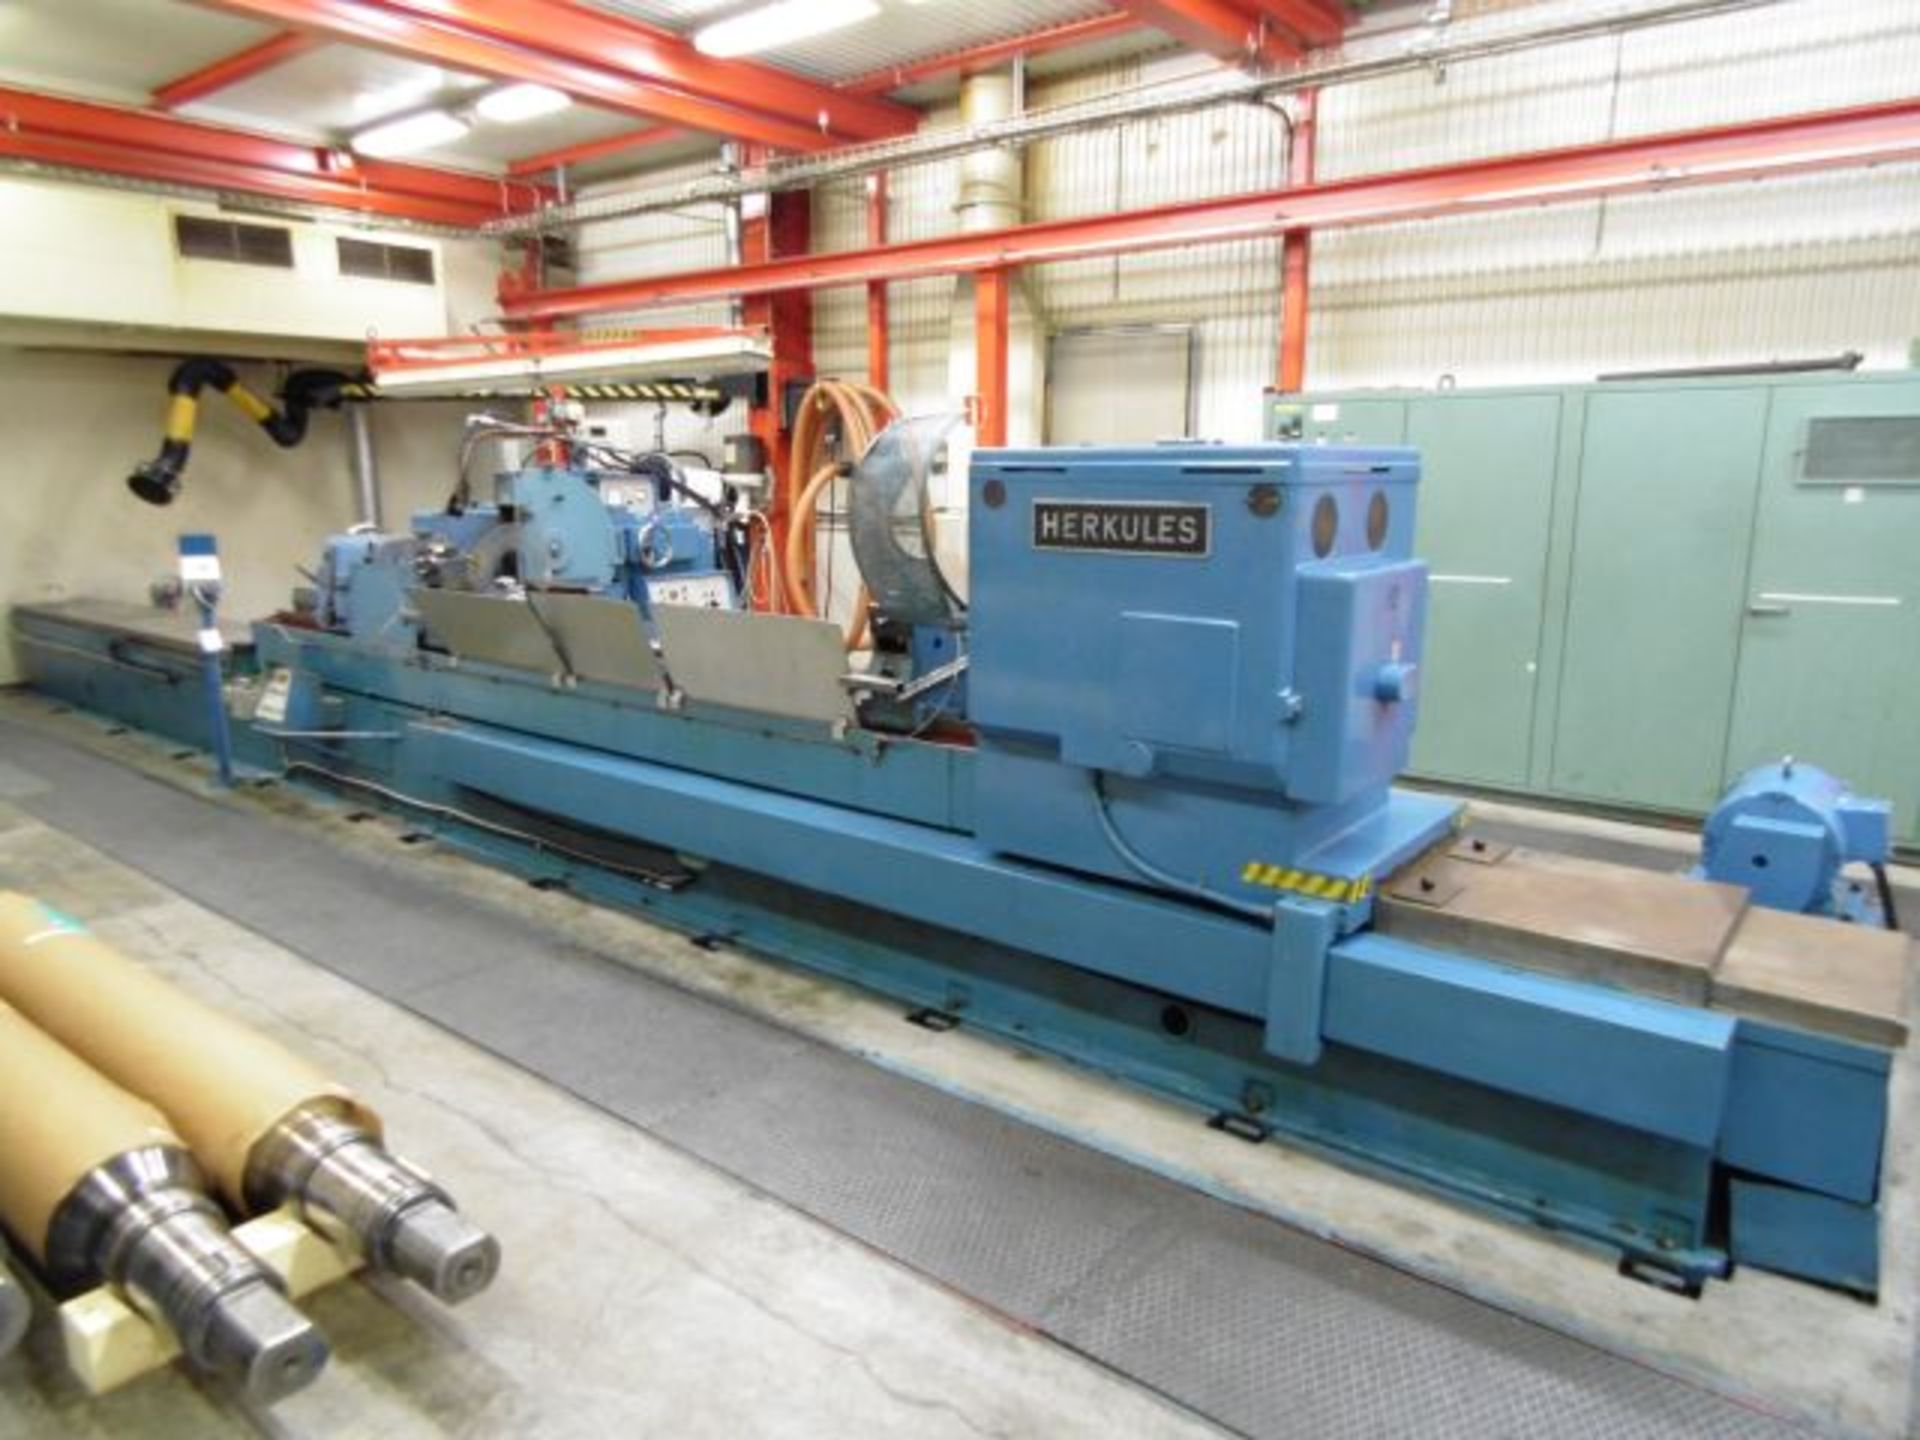 * Herkules Roll Grinder suitable for Fata Hunter Mill Rolls. Click here to view more information